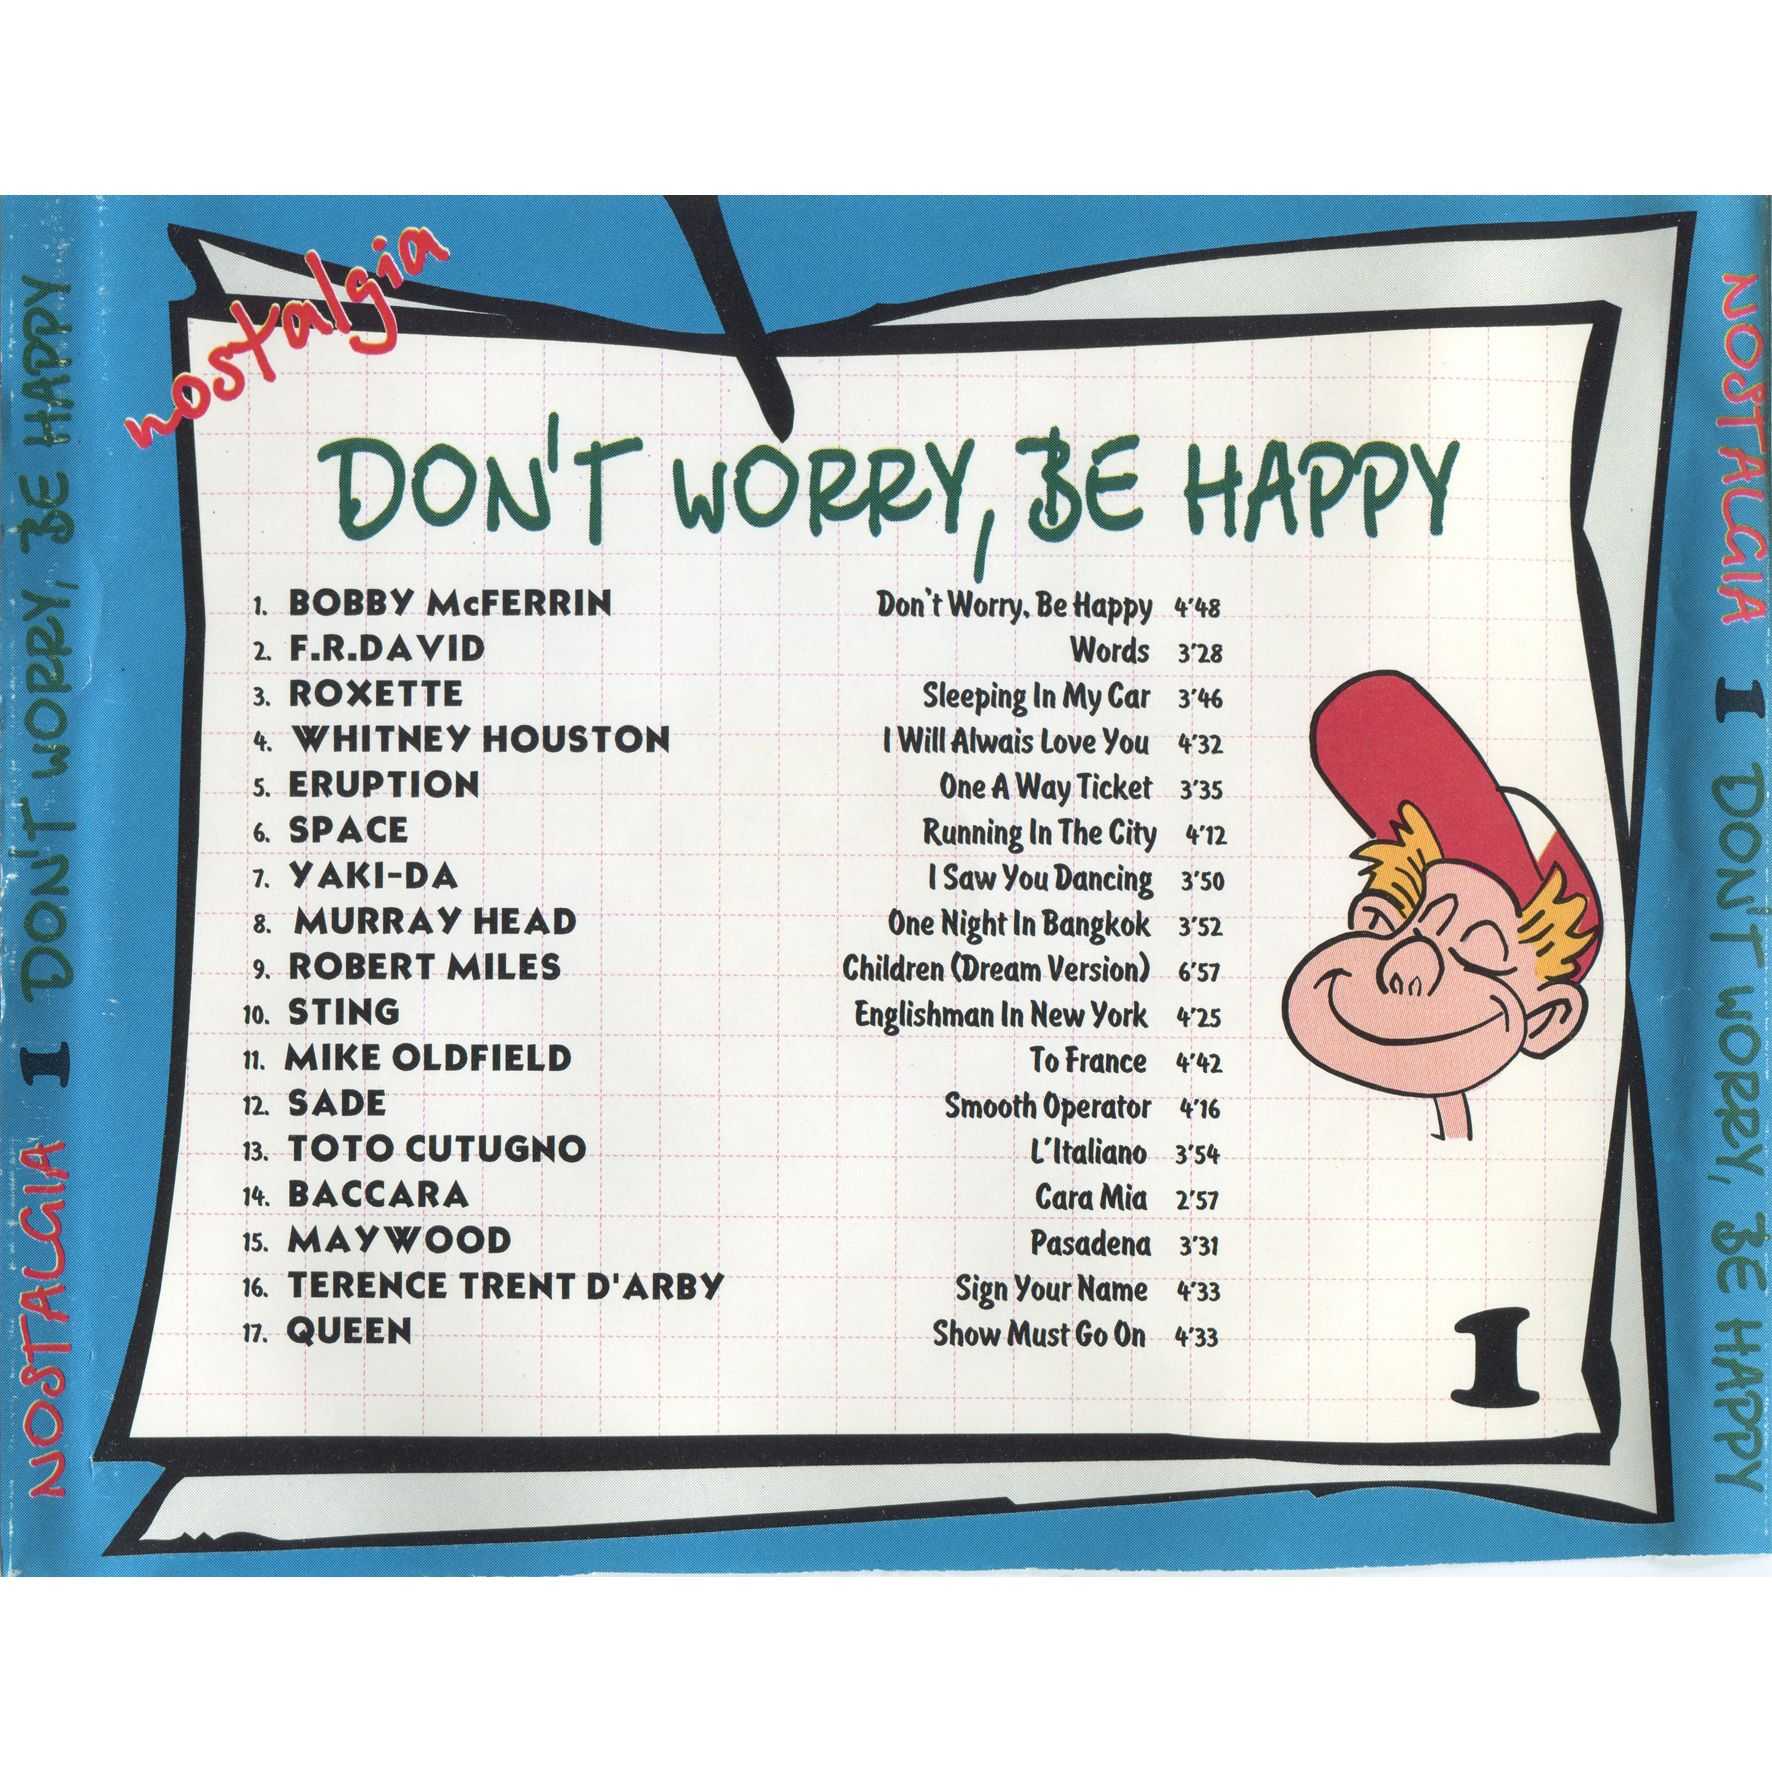 Don worry be happy на русском. Don t worry be Happy текст. Донт вори би Хэппи текст. Don`t worry be Happy перевод. Don't worry текст.